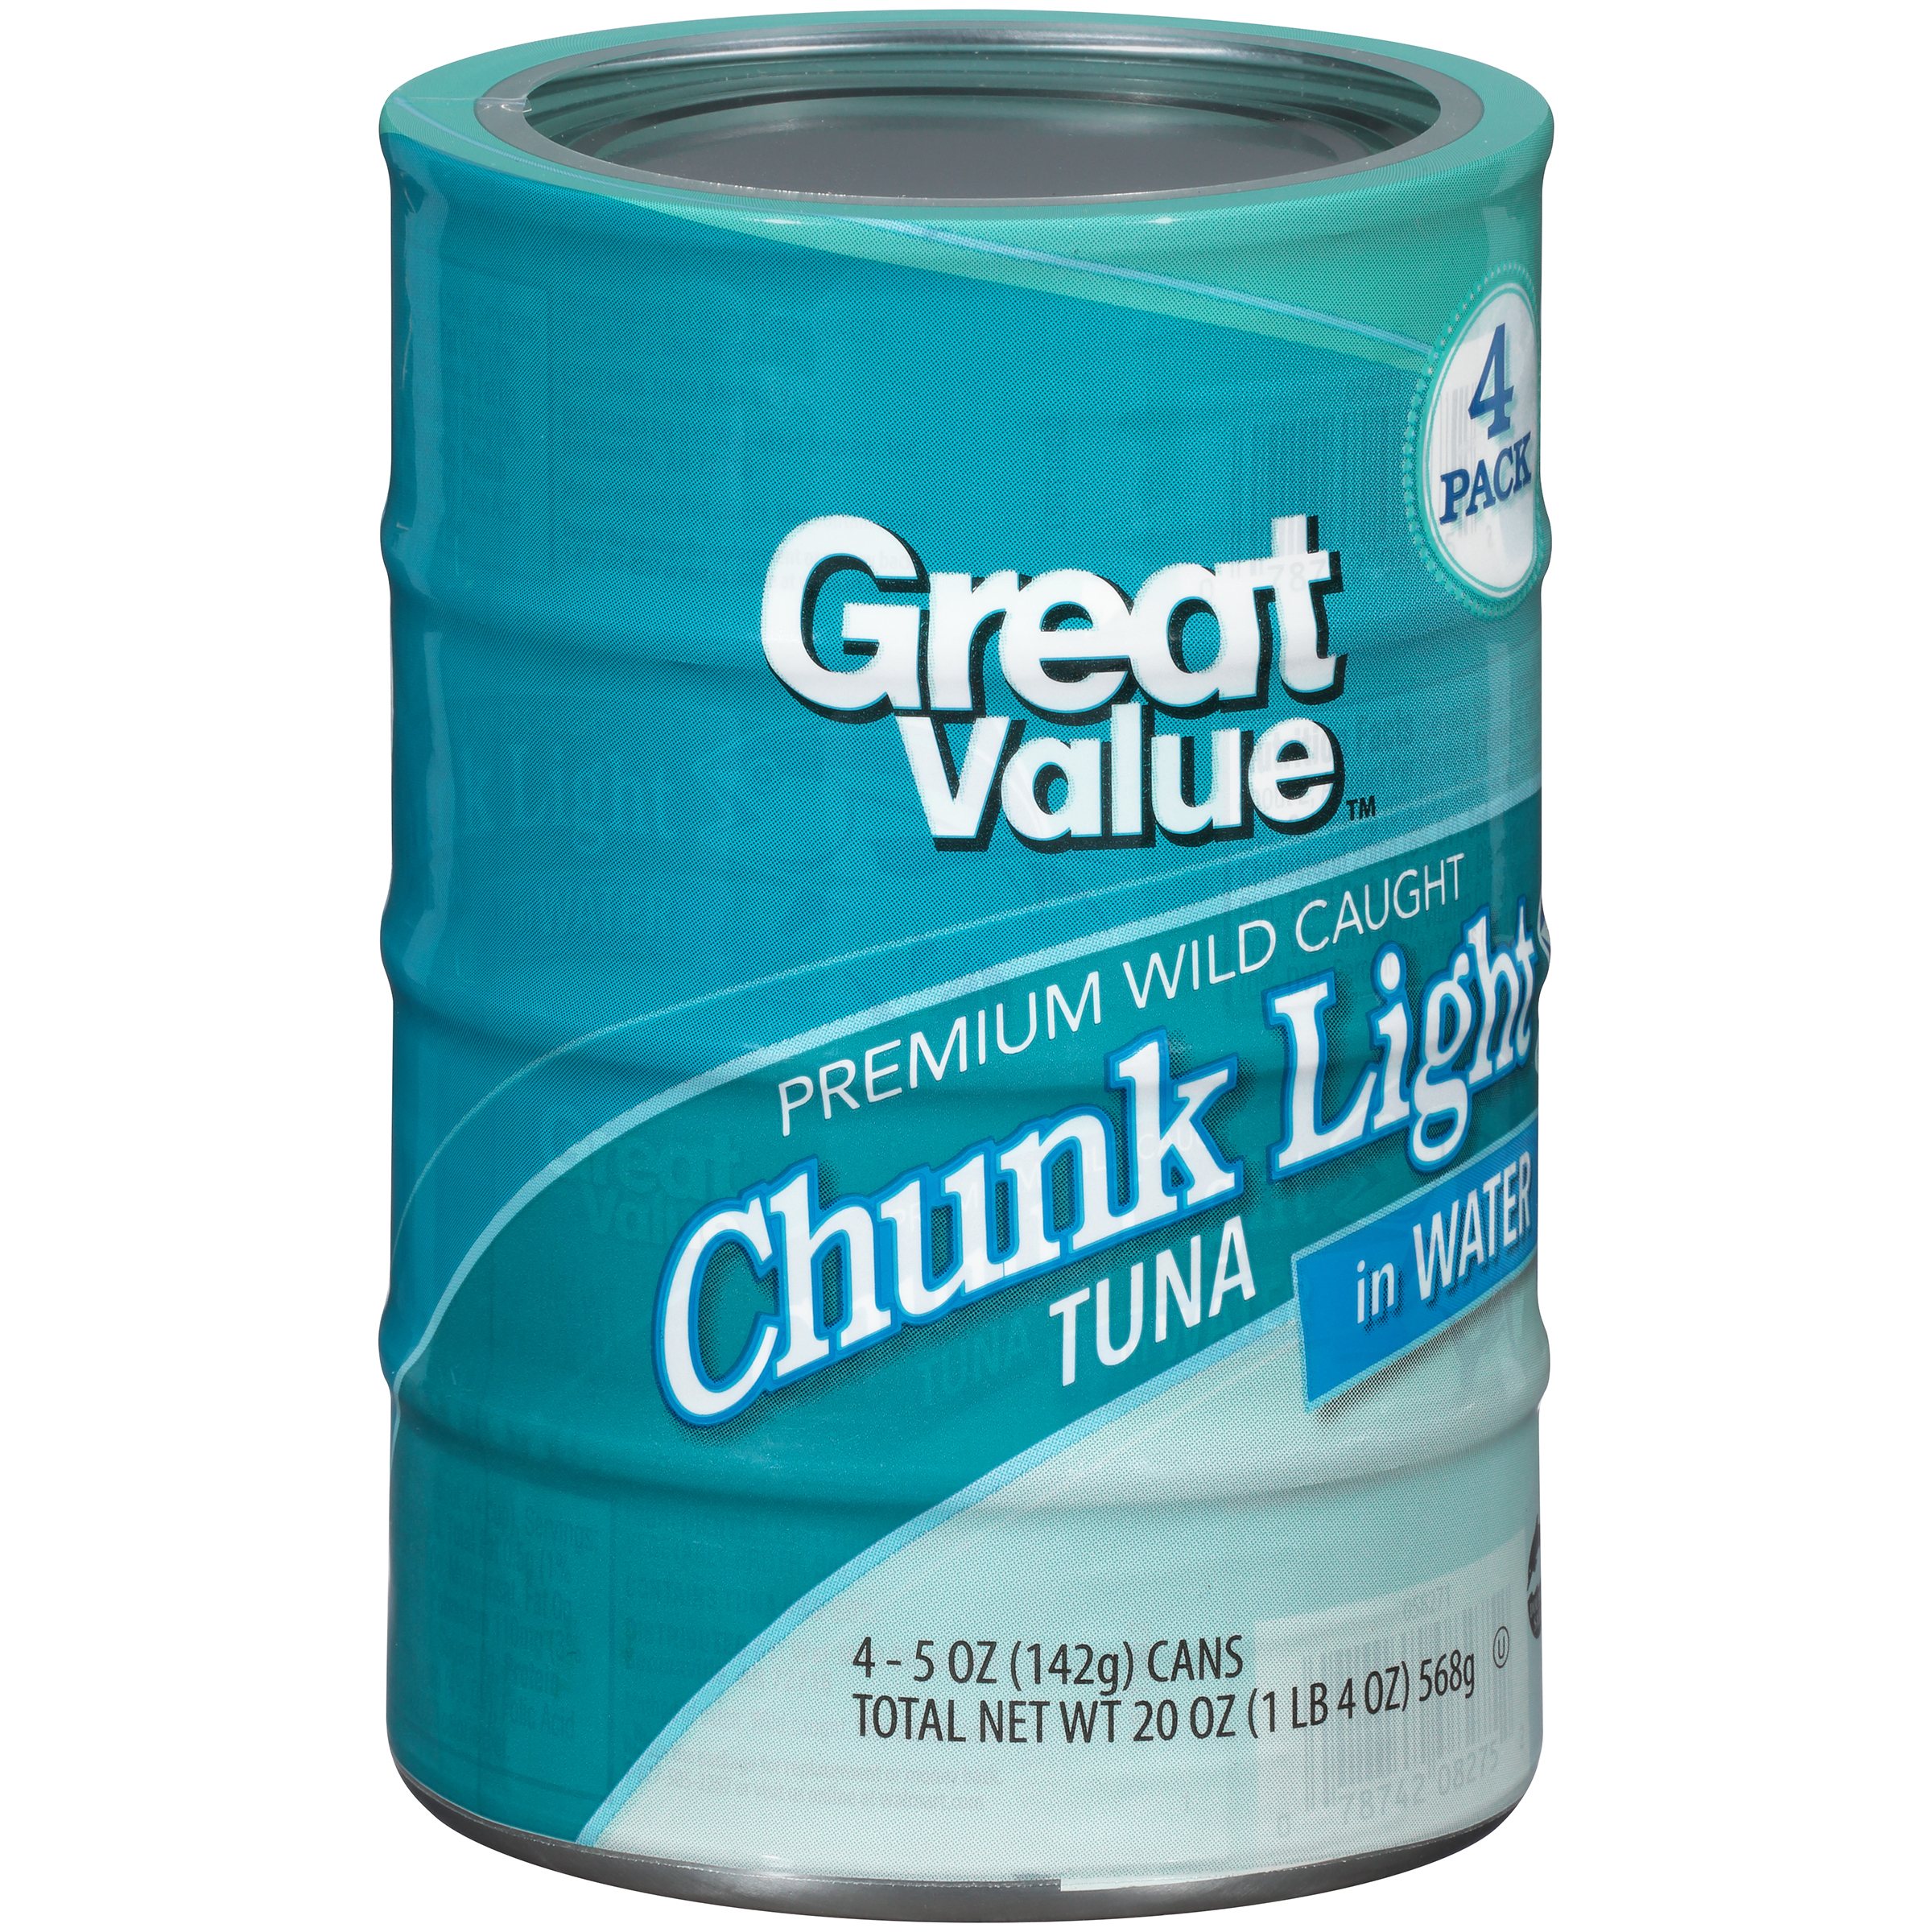 (4 Cans) Great Value Chunk Light Tuna in Water, 5 Oz Image